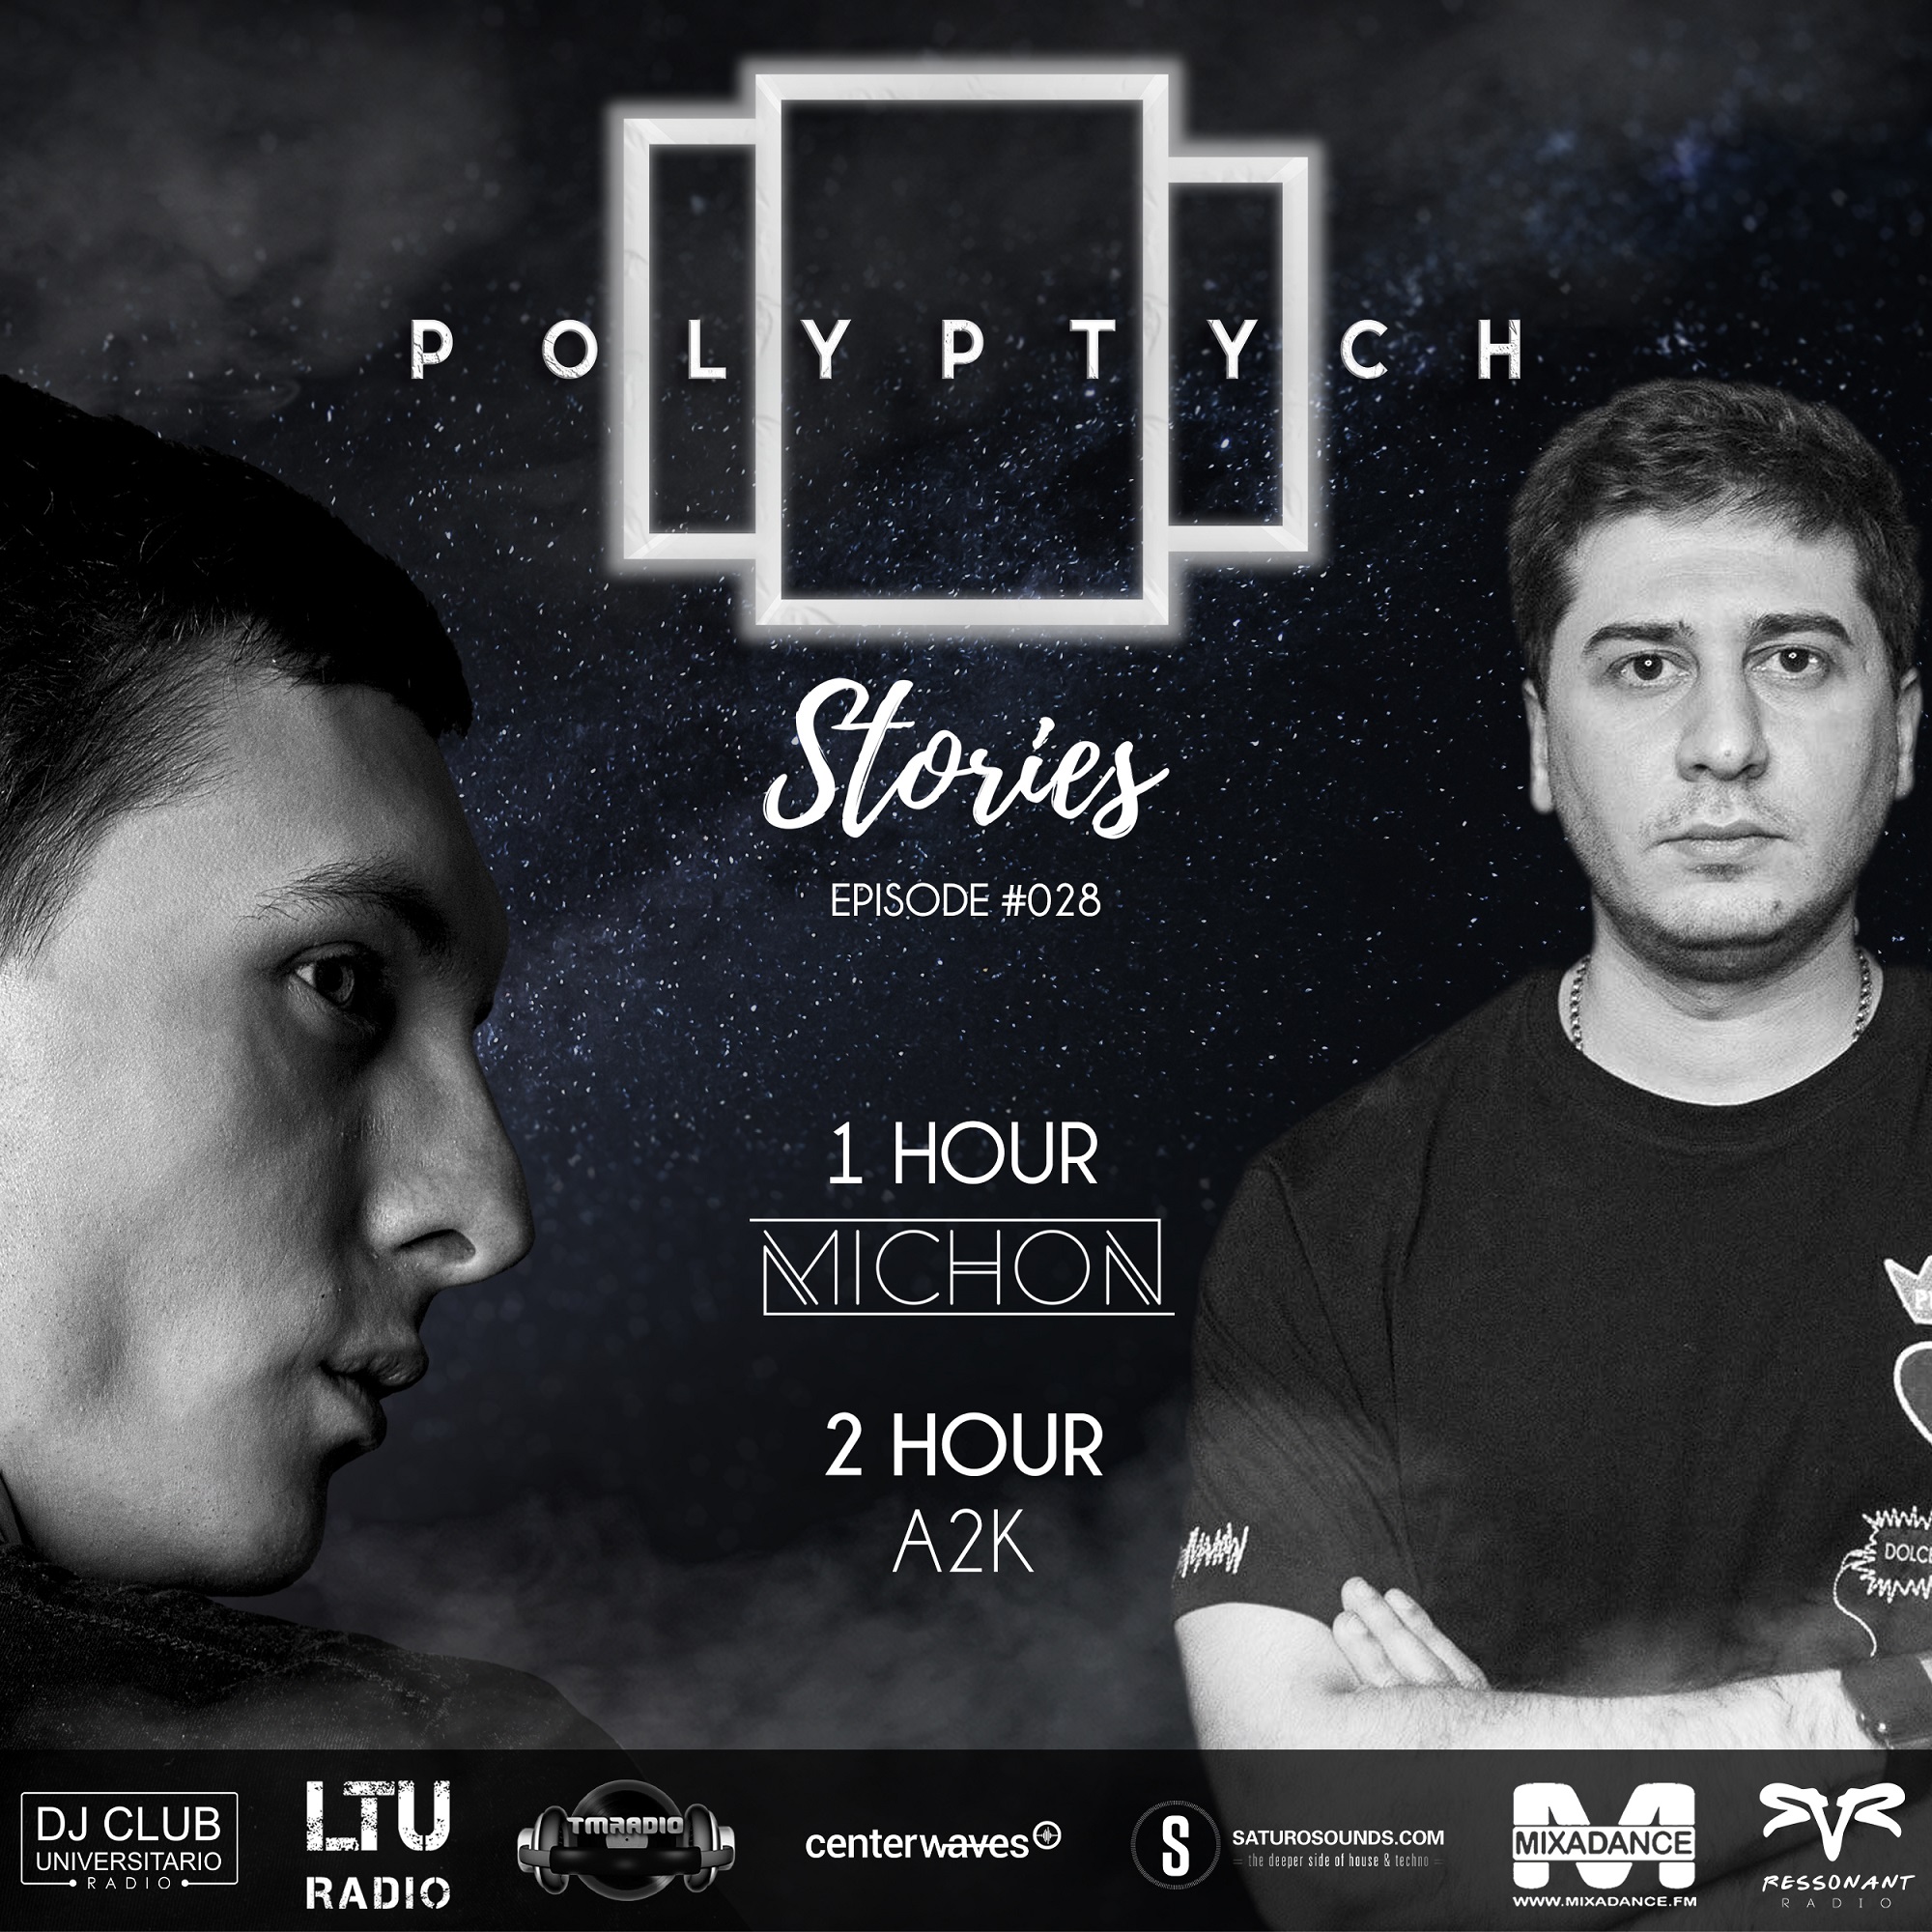 Polyptych Stories :: Episode #028 (1st Hour - Michon, 2nd Hour - A2k) (aired on March 7th, 2021) banner logo